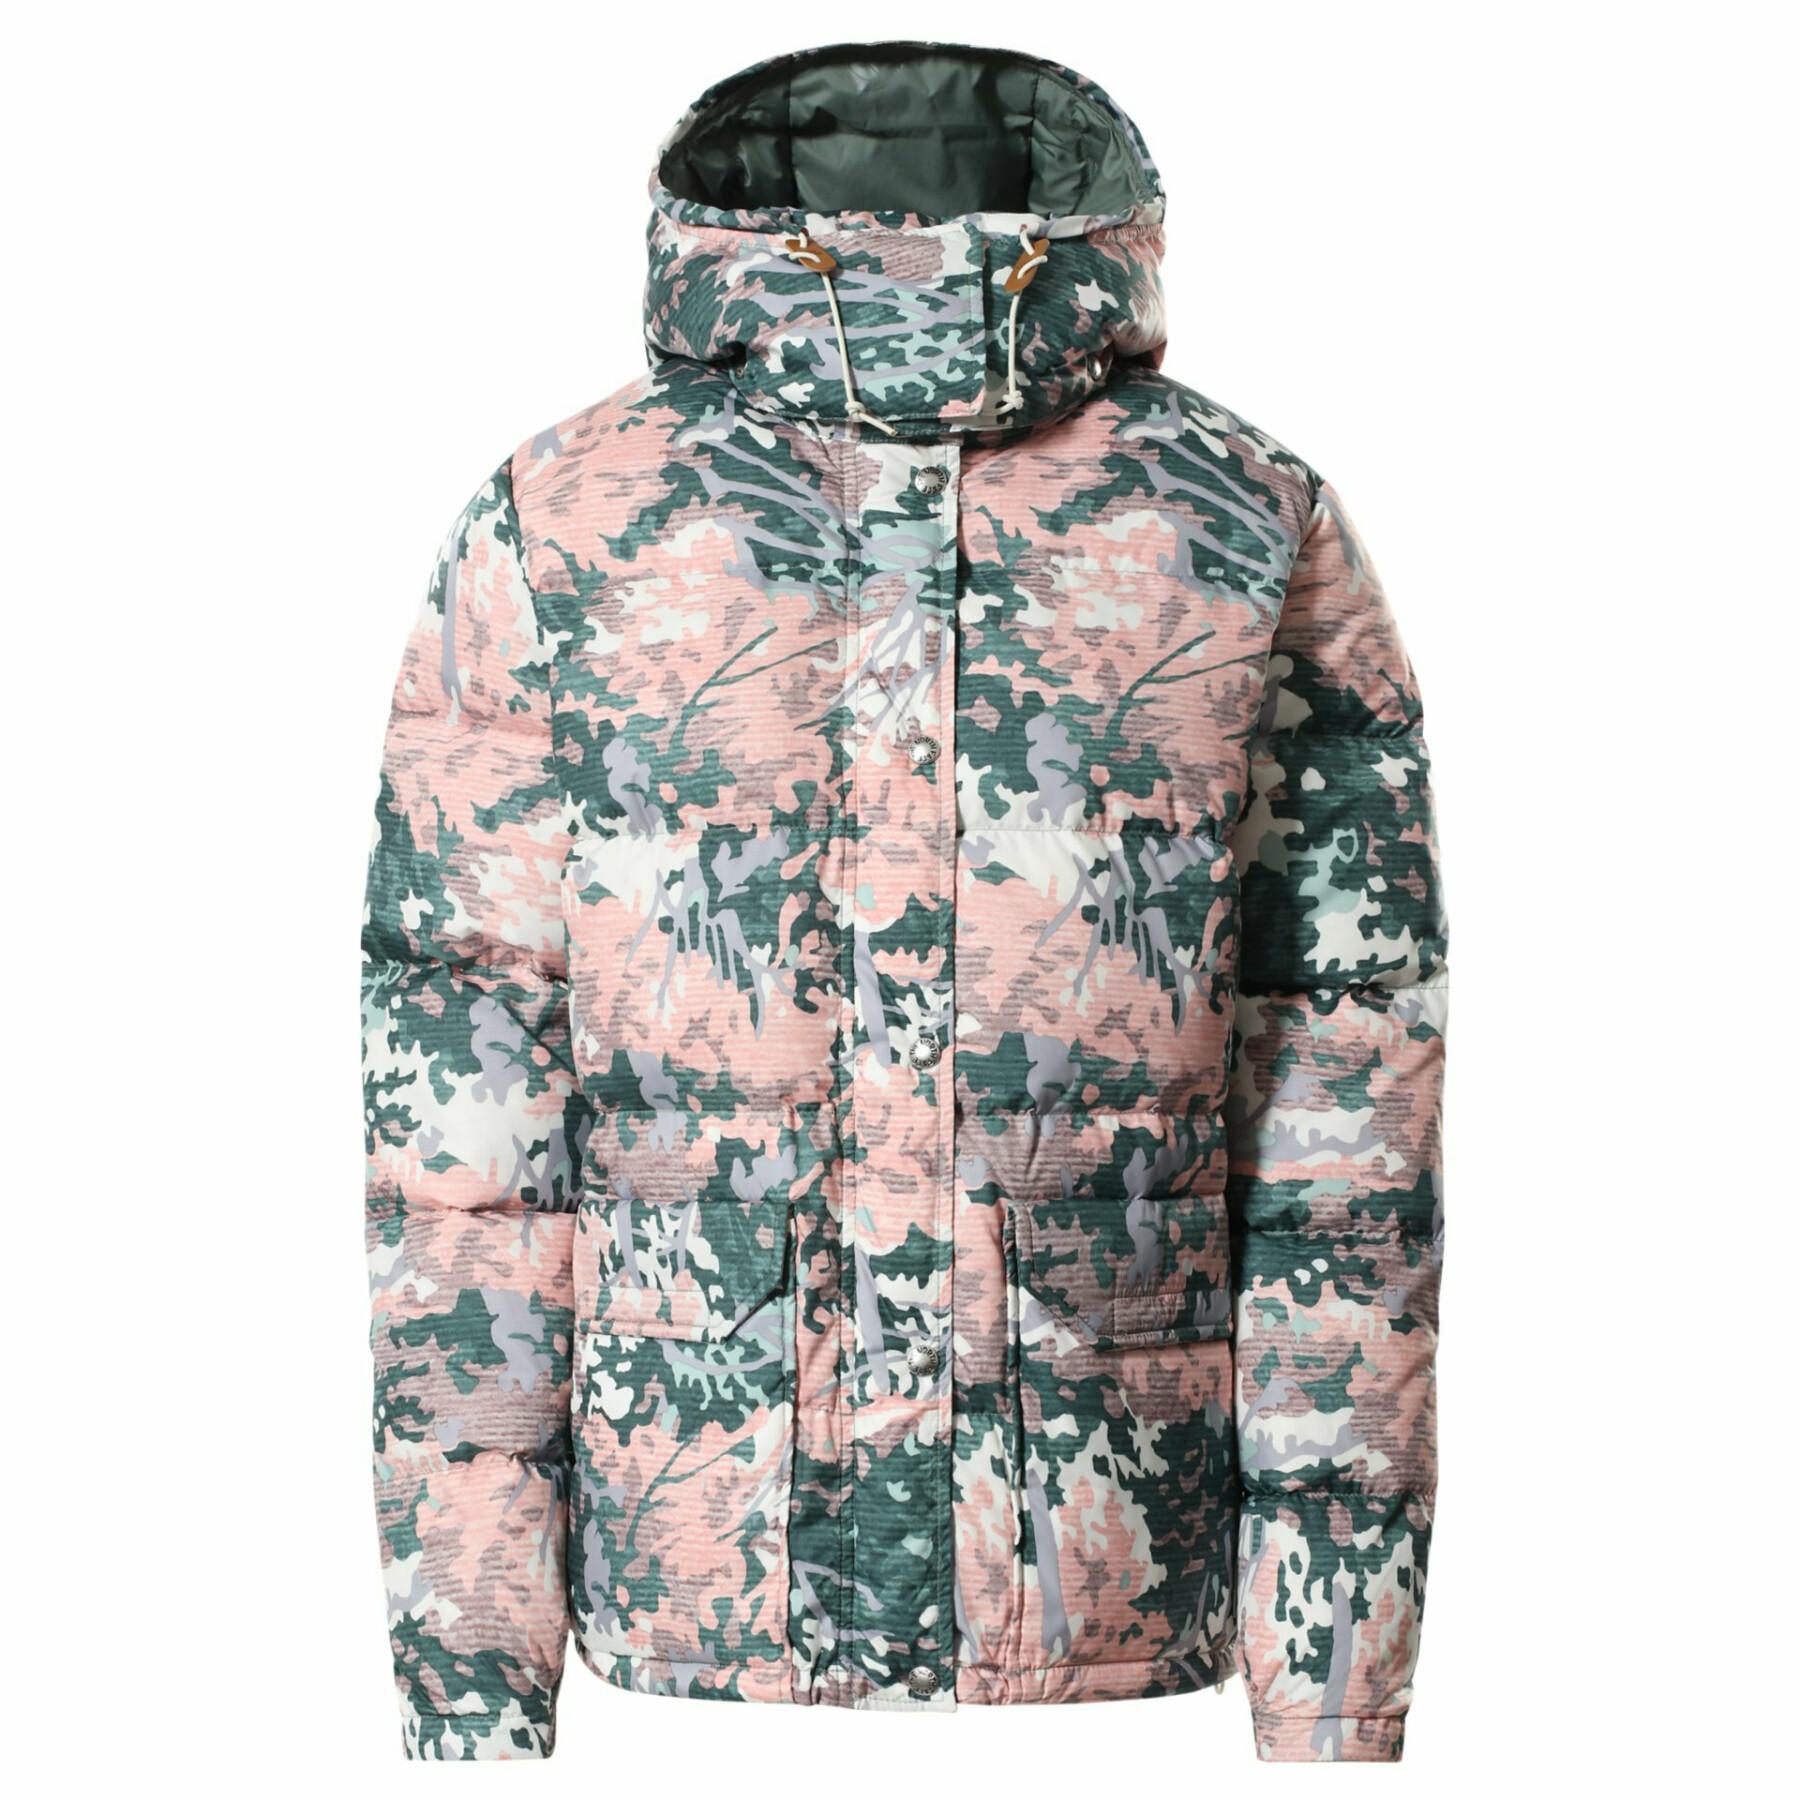 Parka femme The North Face Printed Sierra